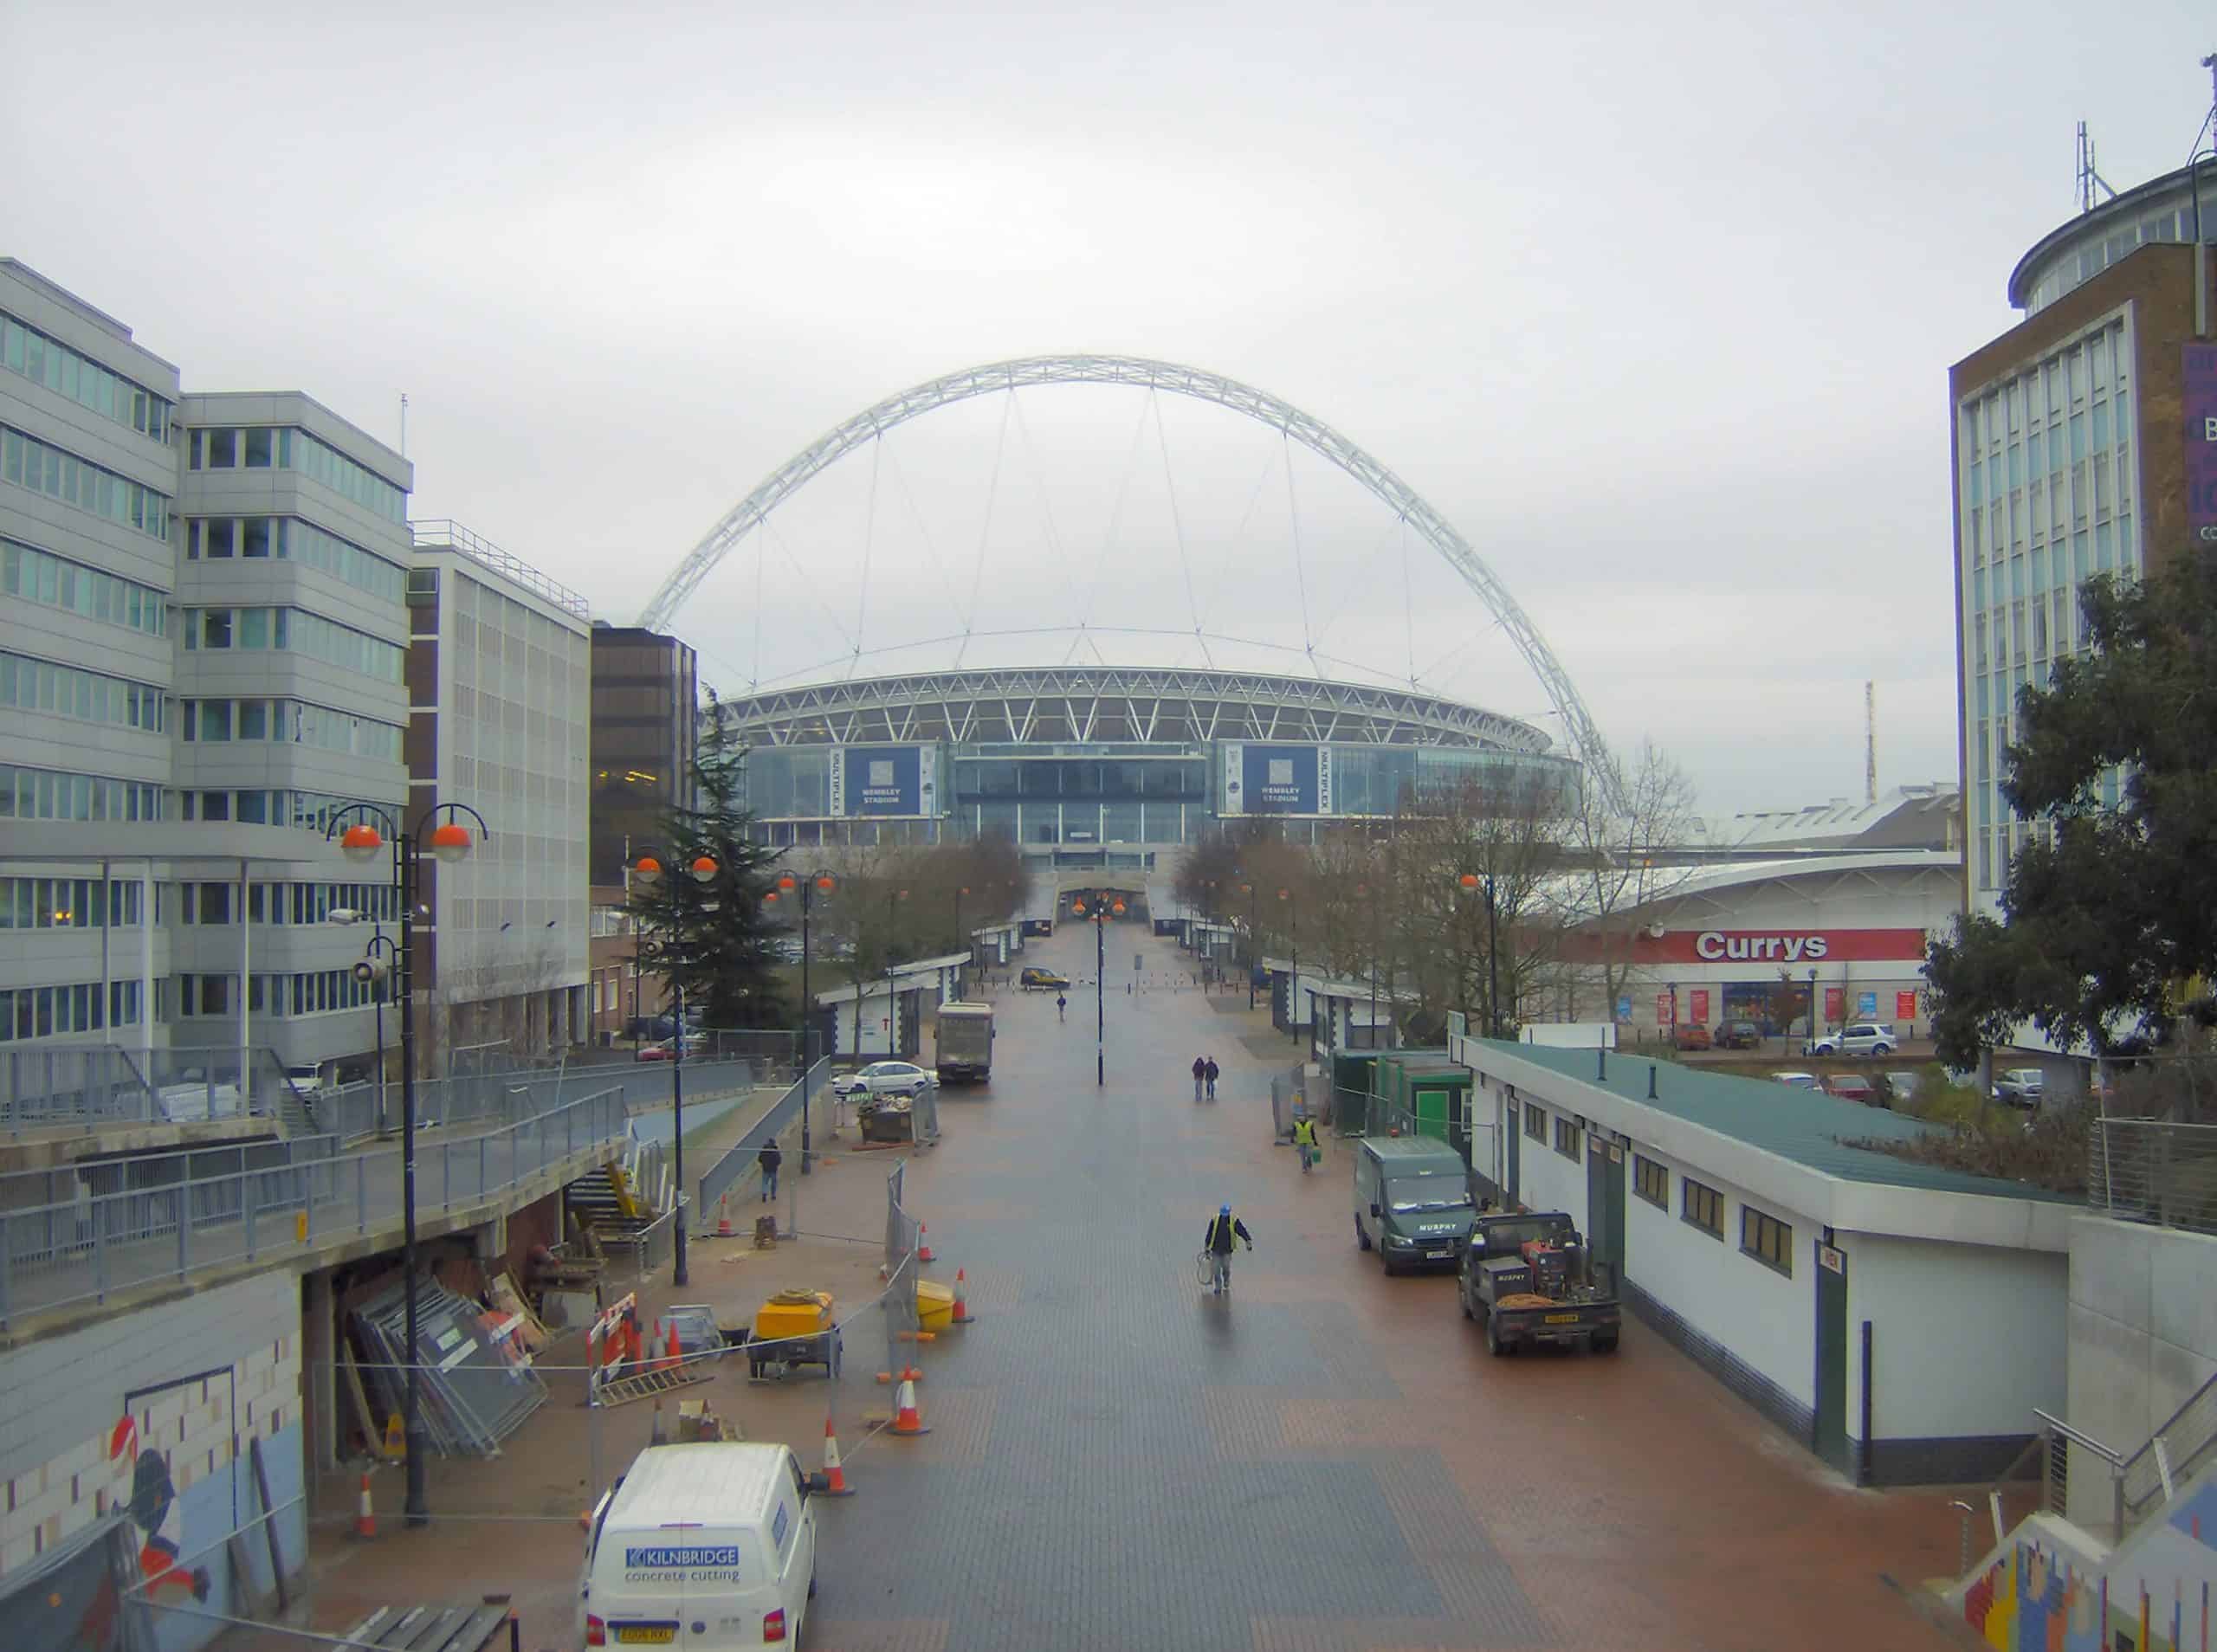 <p>The original Wembley Stadium, built in 1923, was demolished in 2003 and rebuilt. The new stadium, Wembley Stadium, opened in 2007. The stadium hosts memorable sporting and music events.</p><p>Remember to scroll up and hit the ‘Follow’ button to keep up with the newest stories from Seattle Travel on your Microsoft Start feed or MSN homepage!</p>